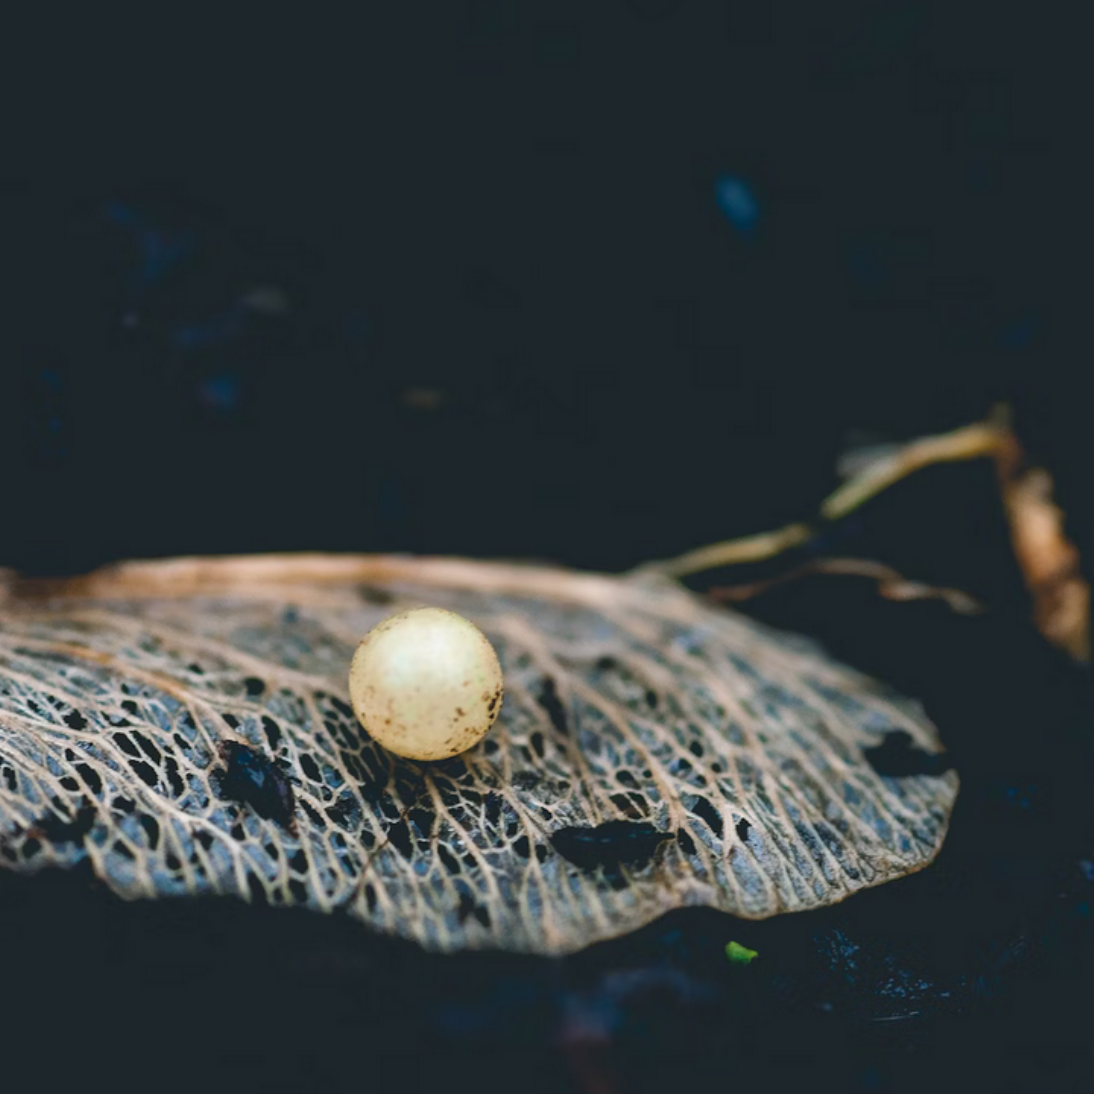 A pearl on a maple seed and some black soil background.